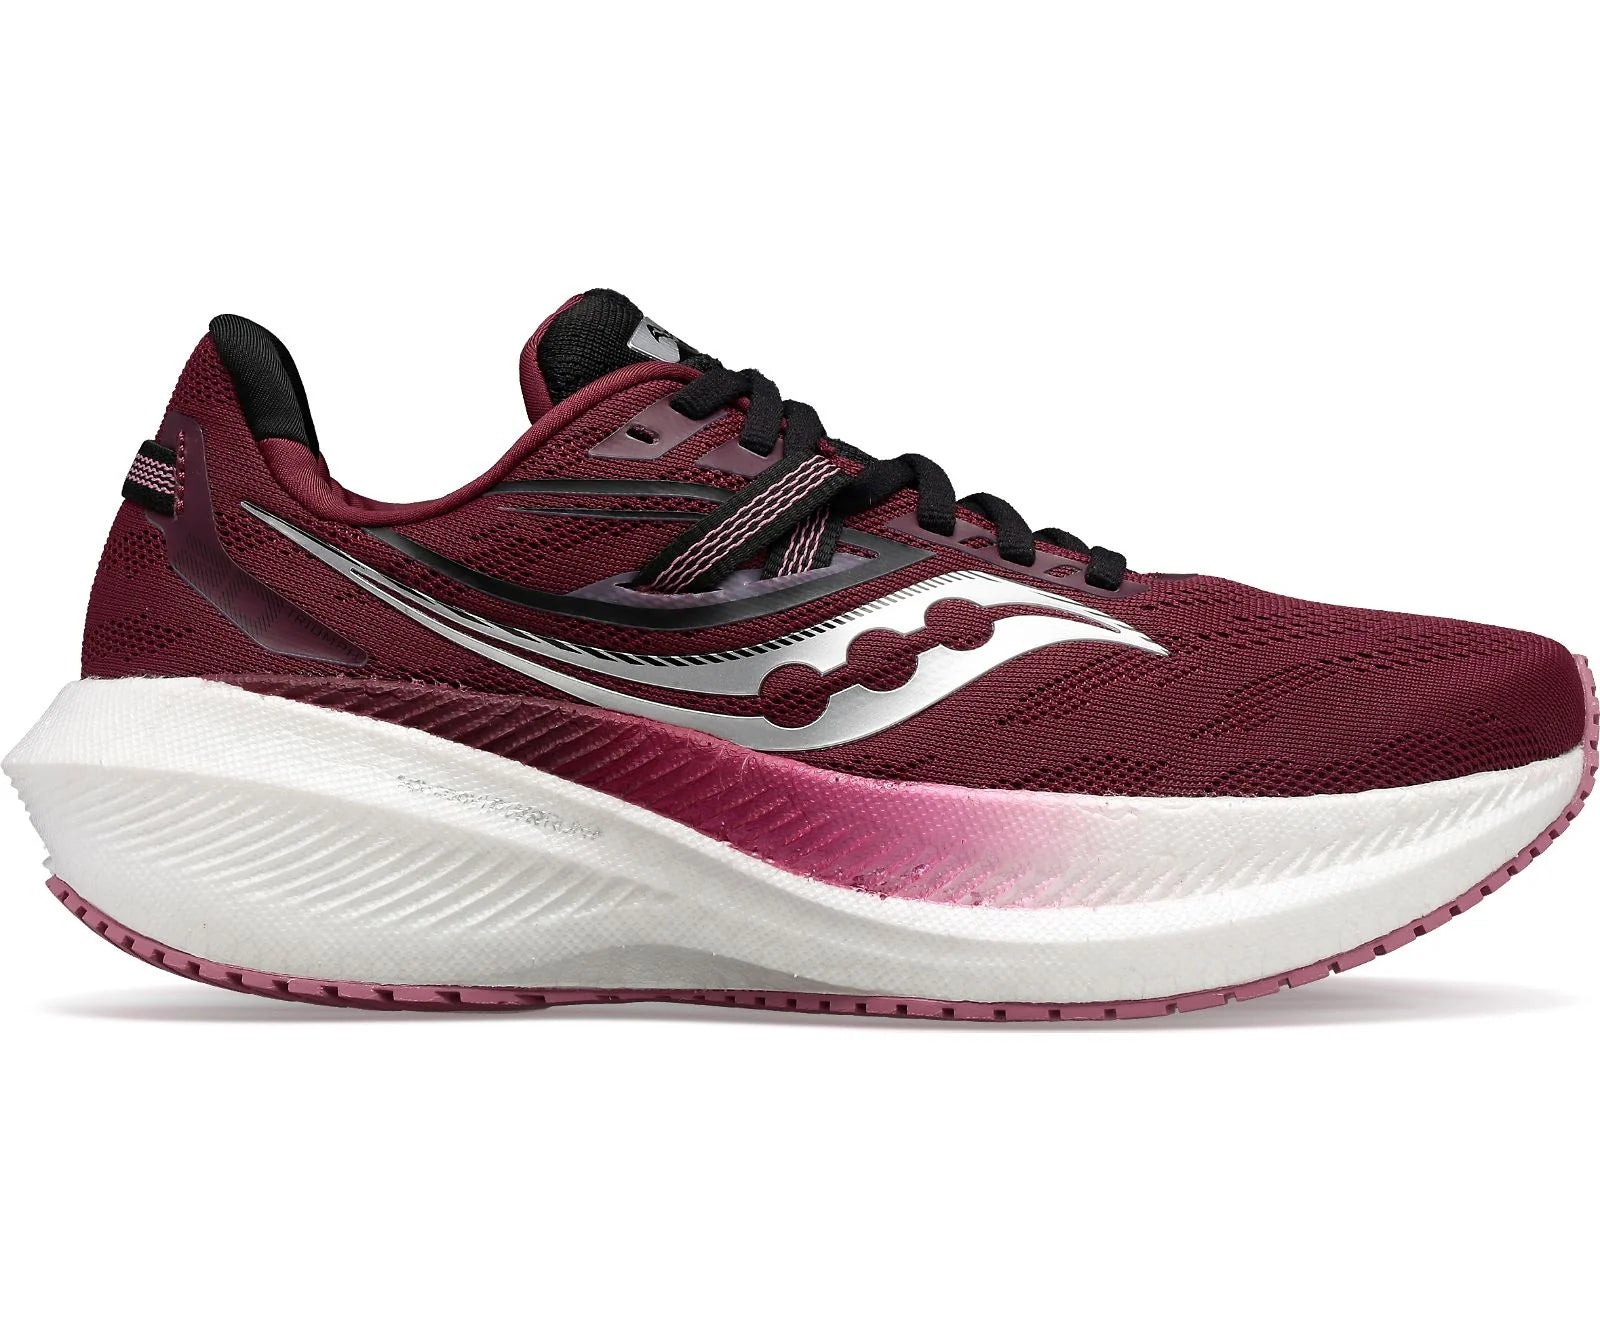 Lateral view of the Women's Triumph 20 by Saucony in the color Sundown / Rose